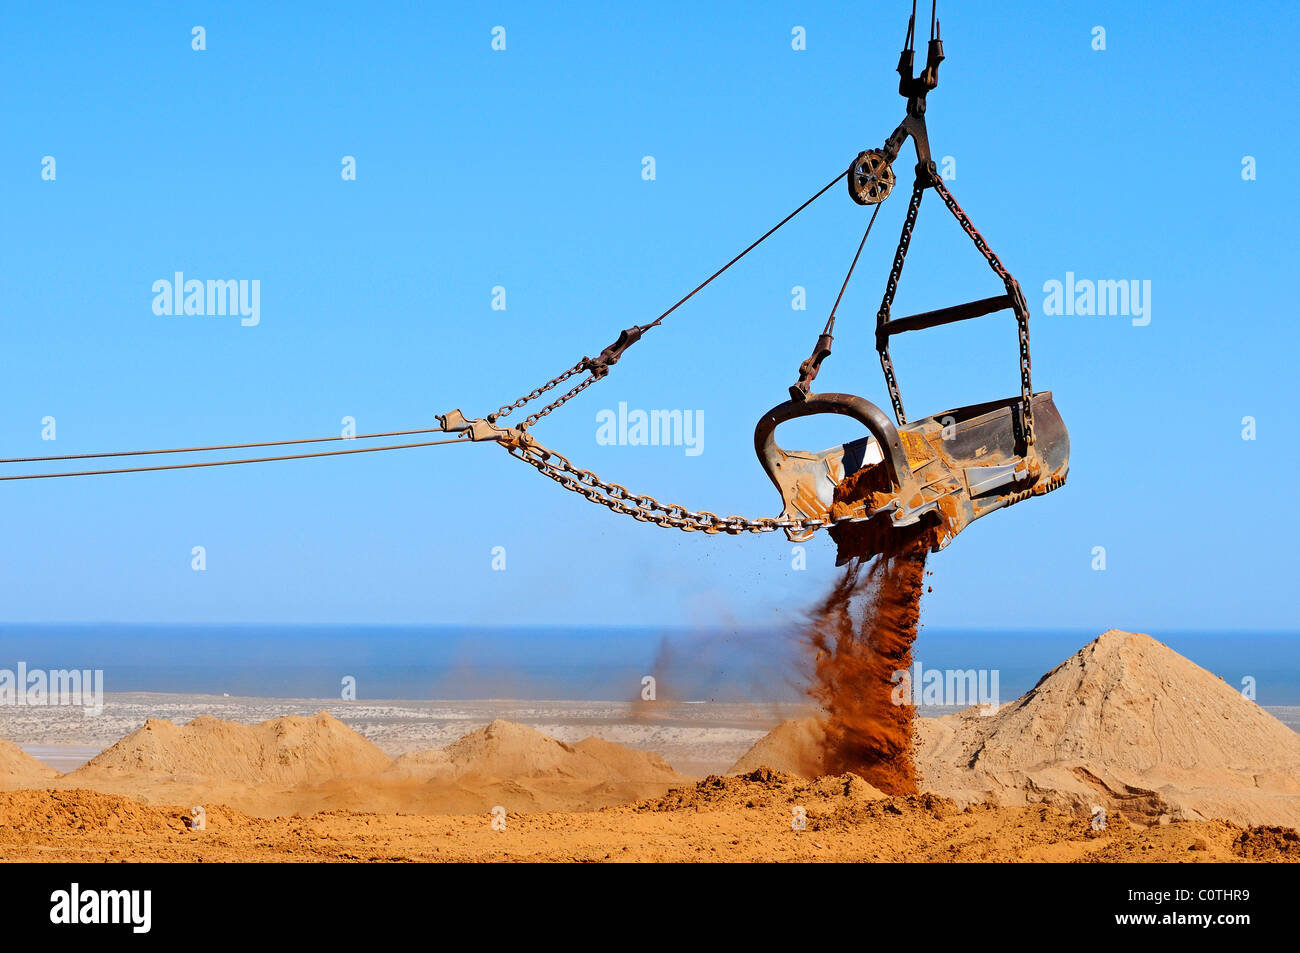 Bucket of a dragline excavator in a diamond mining, De Beers Namaqualand Mines, Kleinzee, Namaqualand, South Africa Stock Photo